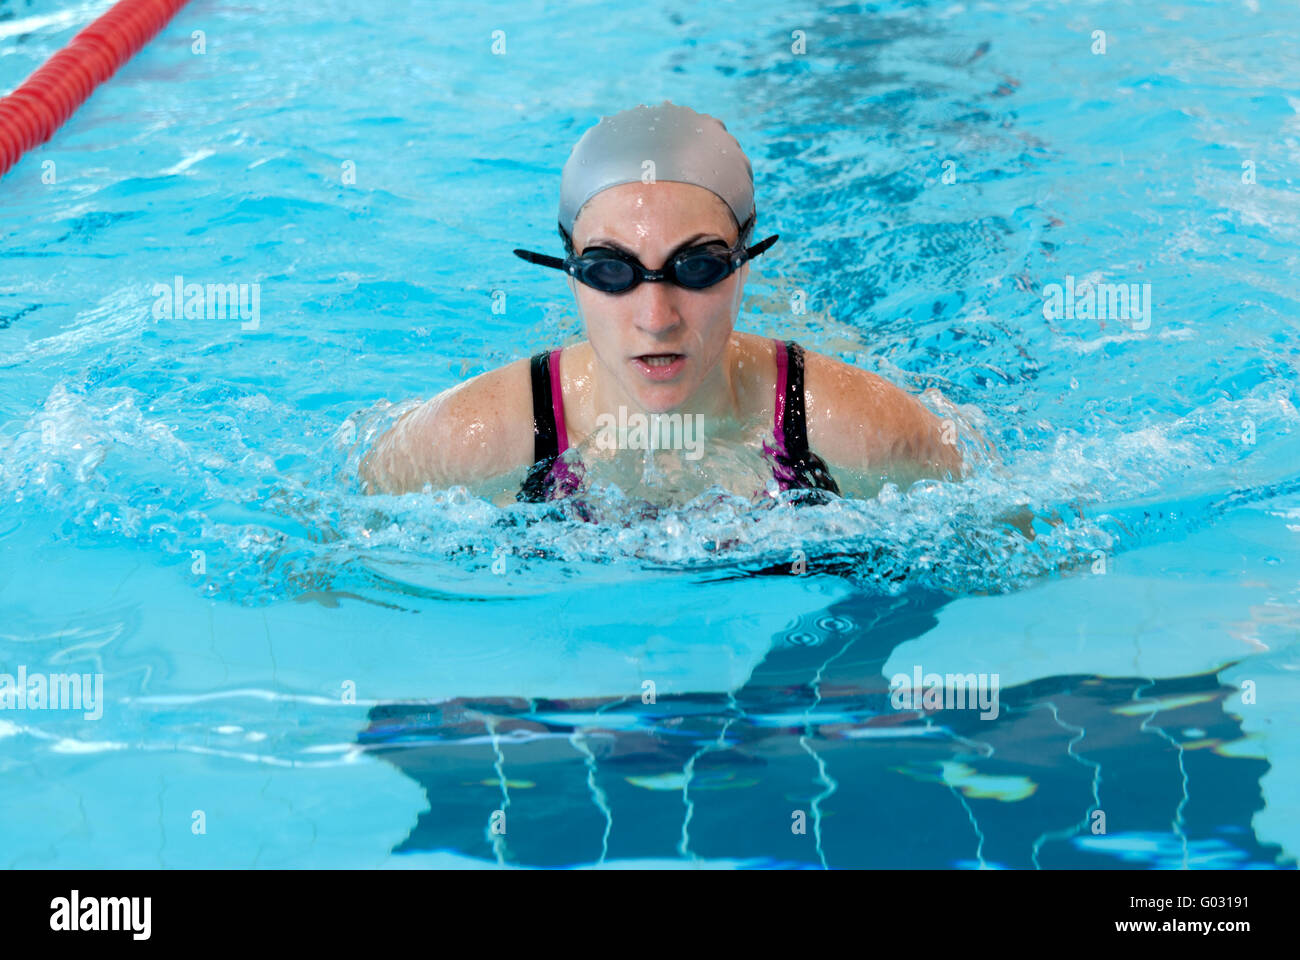 young woman swim on indoor pool close-up. breastroke style. Stock Photo